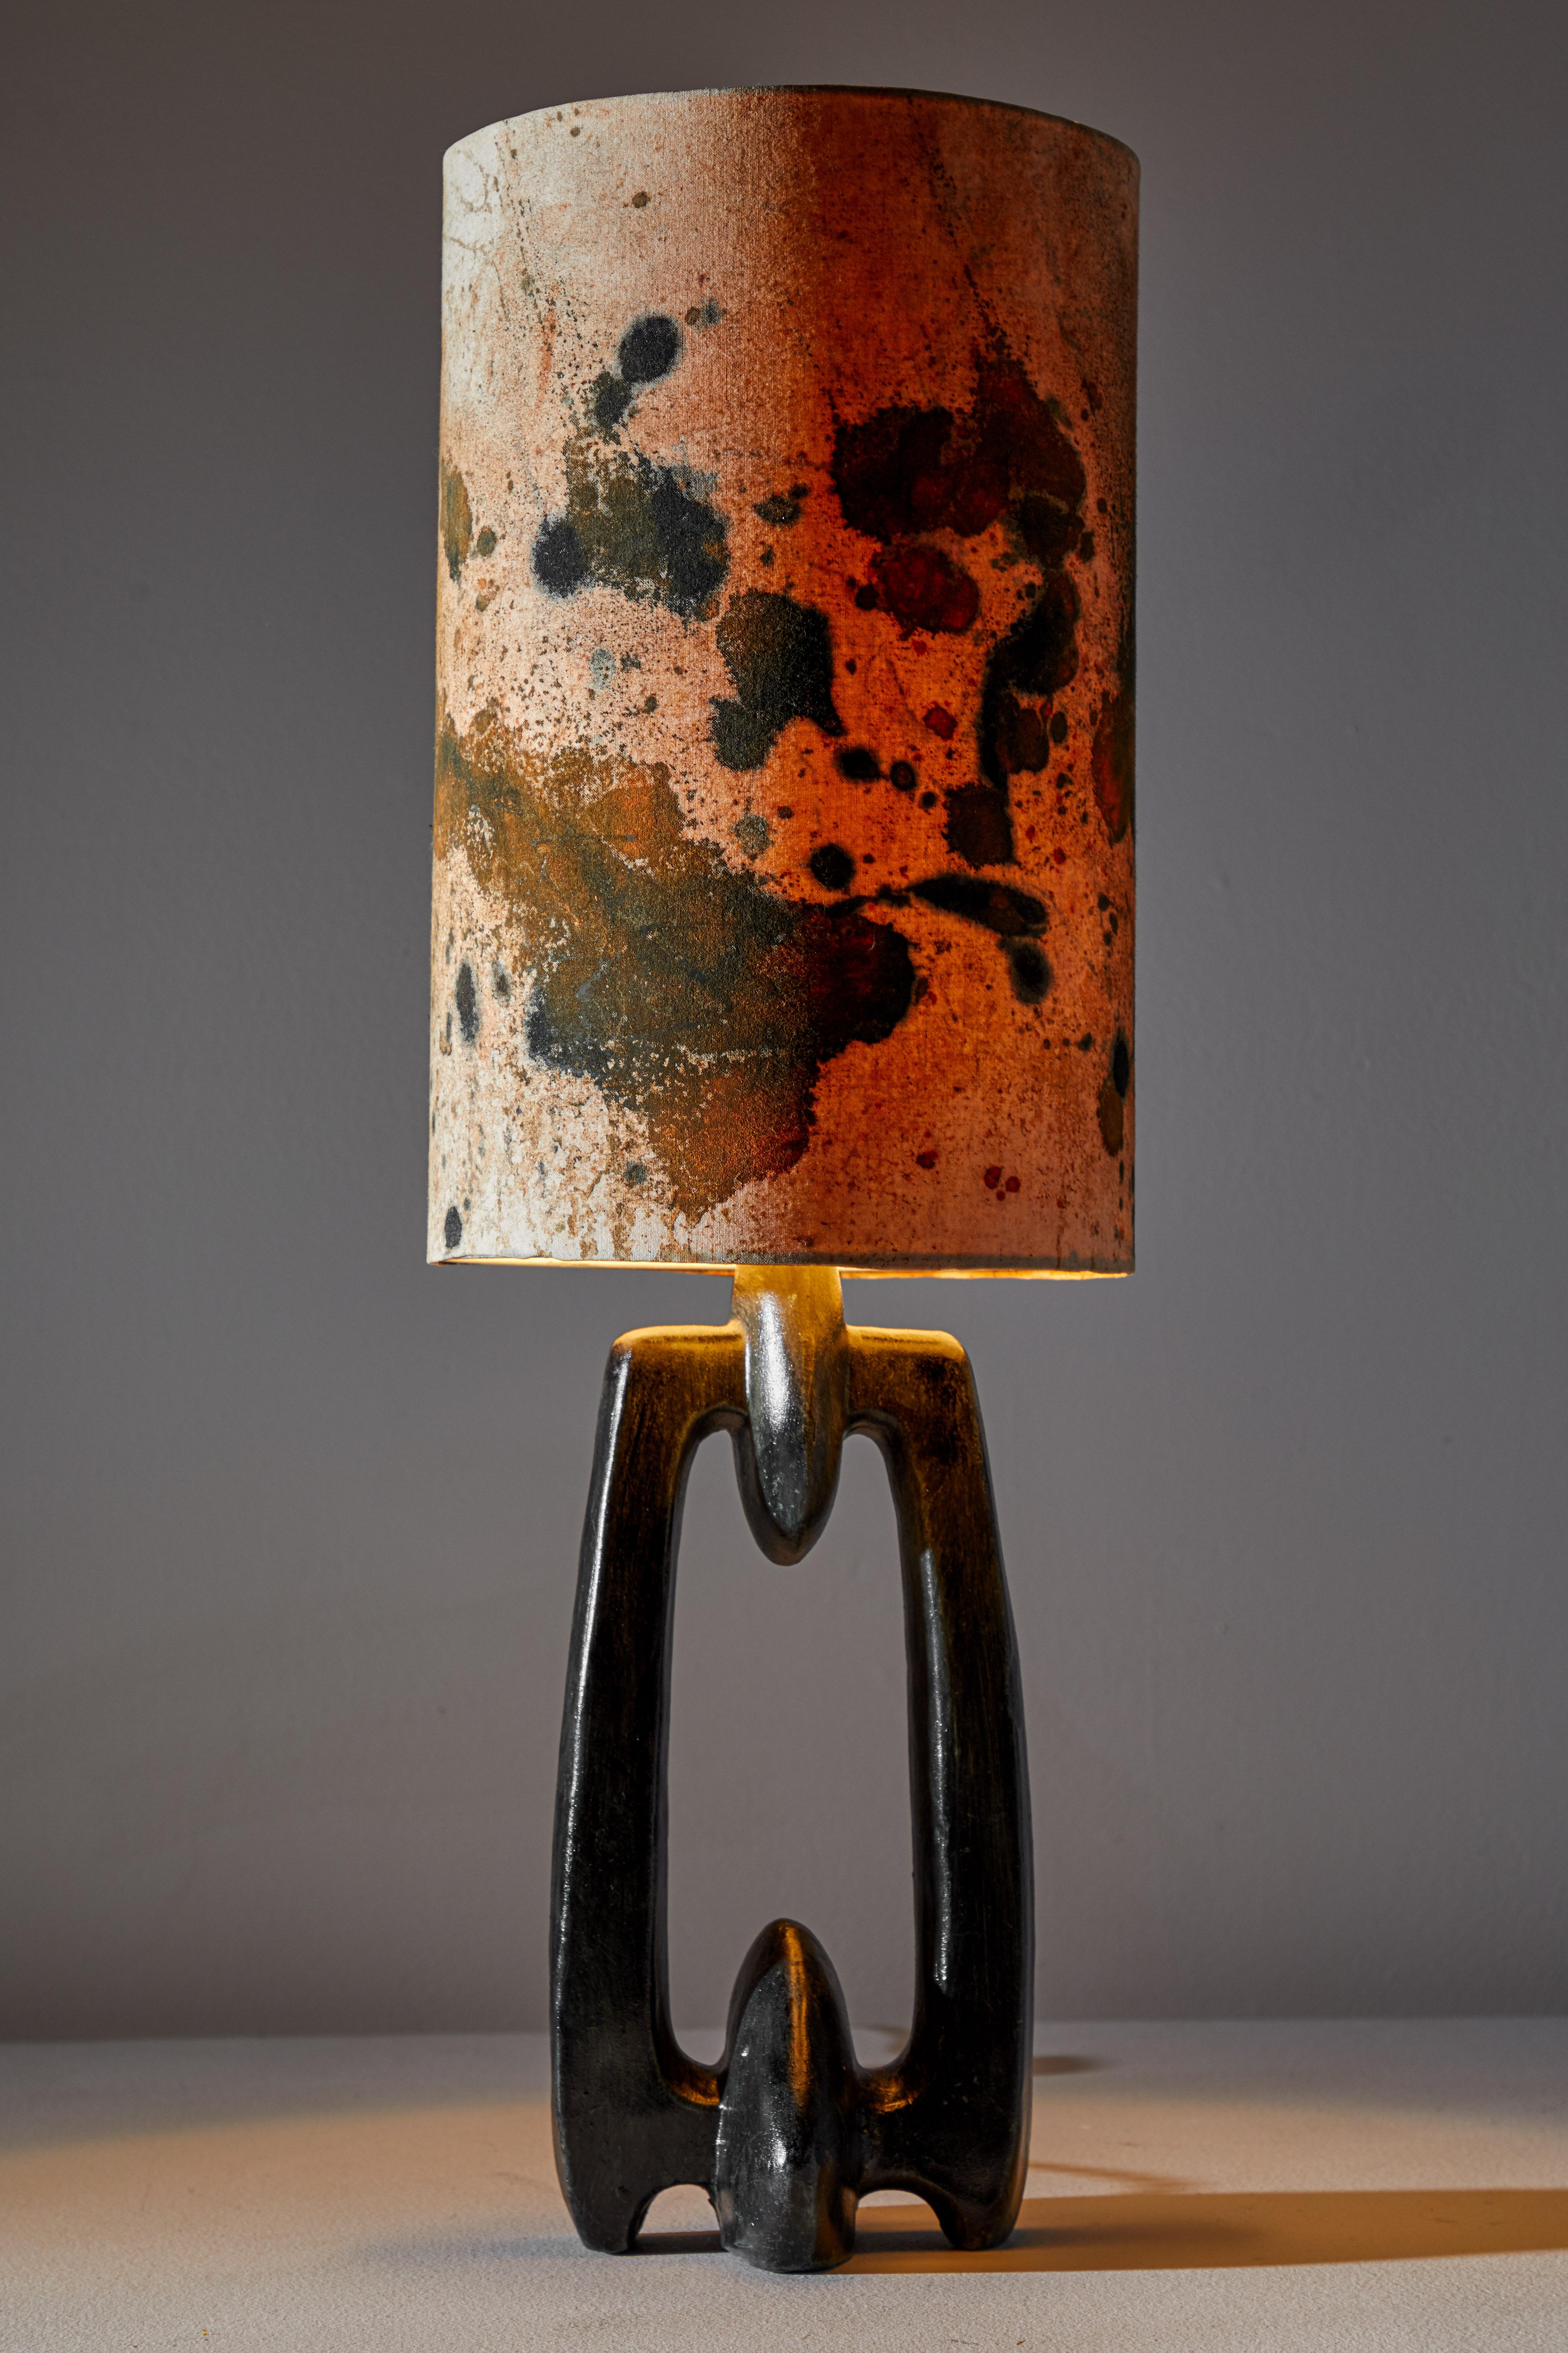 Biomorphic table lamp. Manufactured in the Netherlands, circa 1960s. Raw cotton, hand painted shade, ceramic base. Rewired with black French twist silk cord. Takes one E27 75w maximum bulb. Bulbs provided as a one time courtesy.